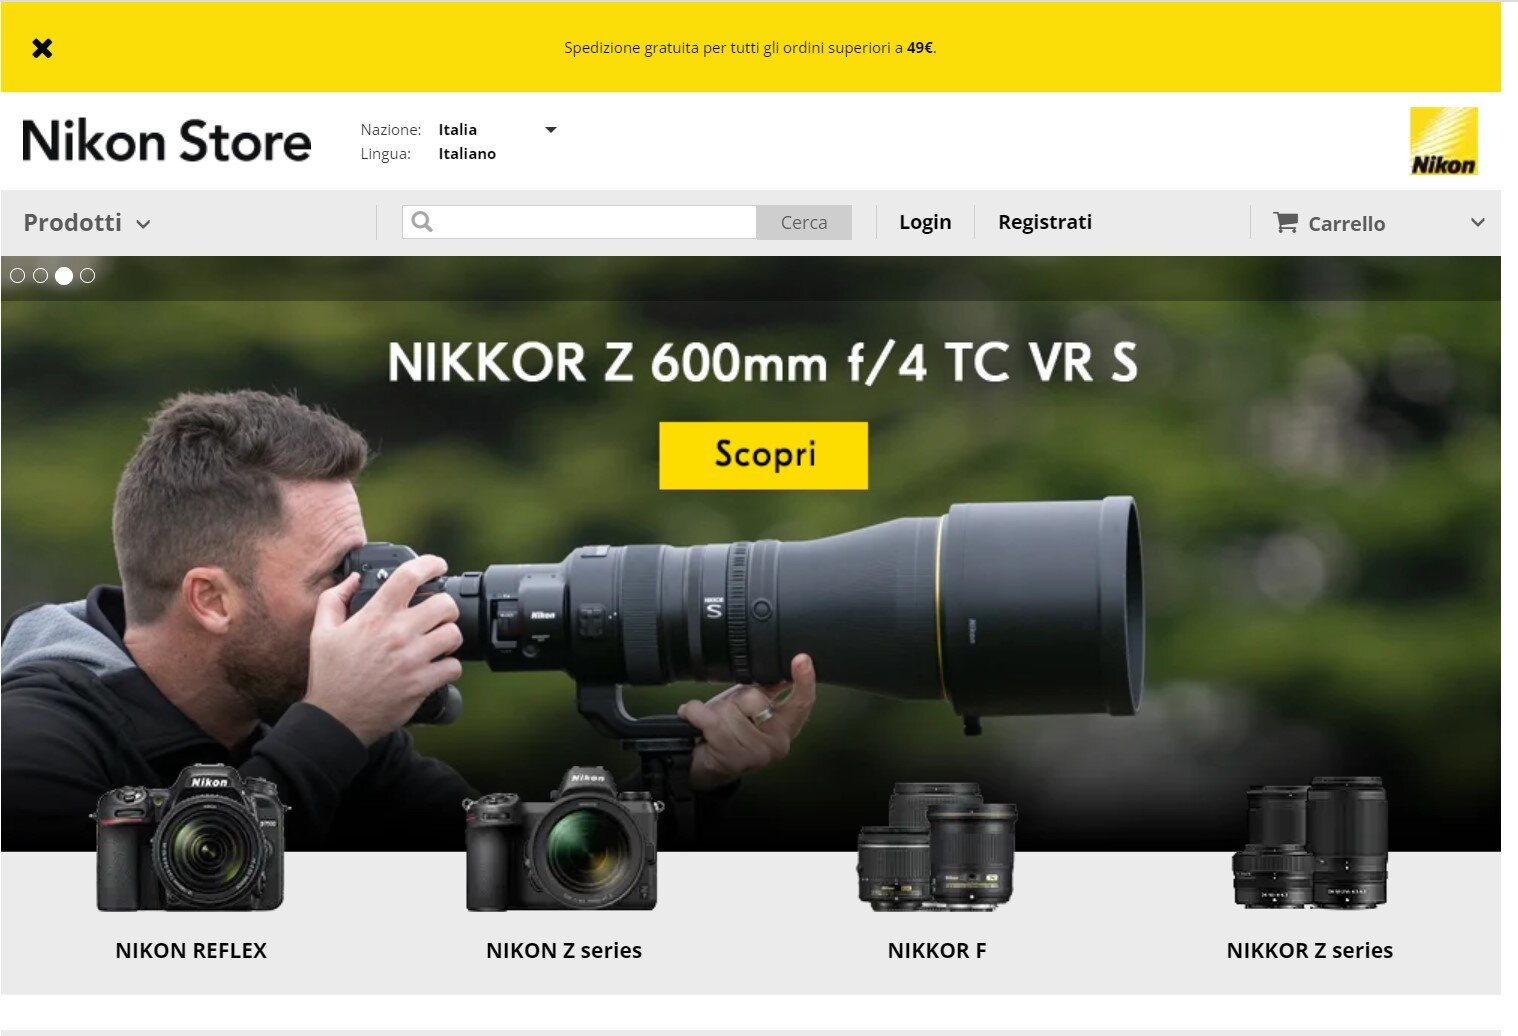 More information about "Nikonstore.it e Nikonstore Outlet (recensione)"